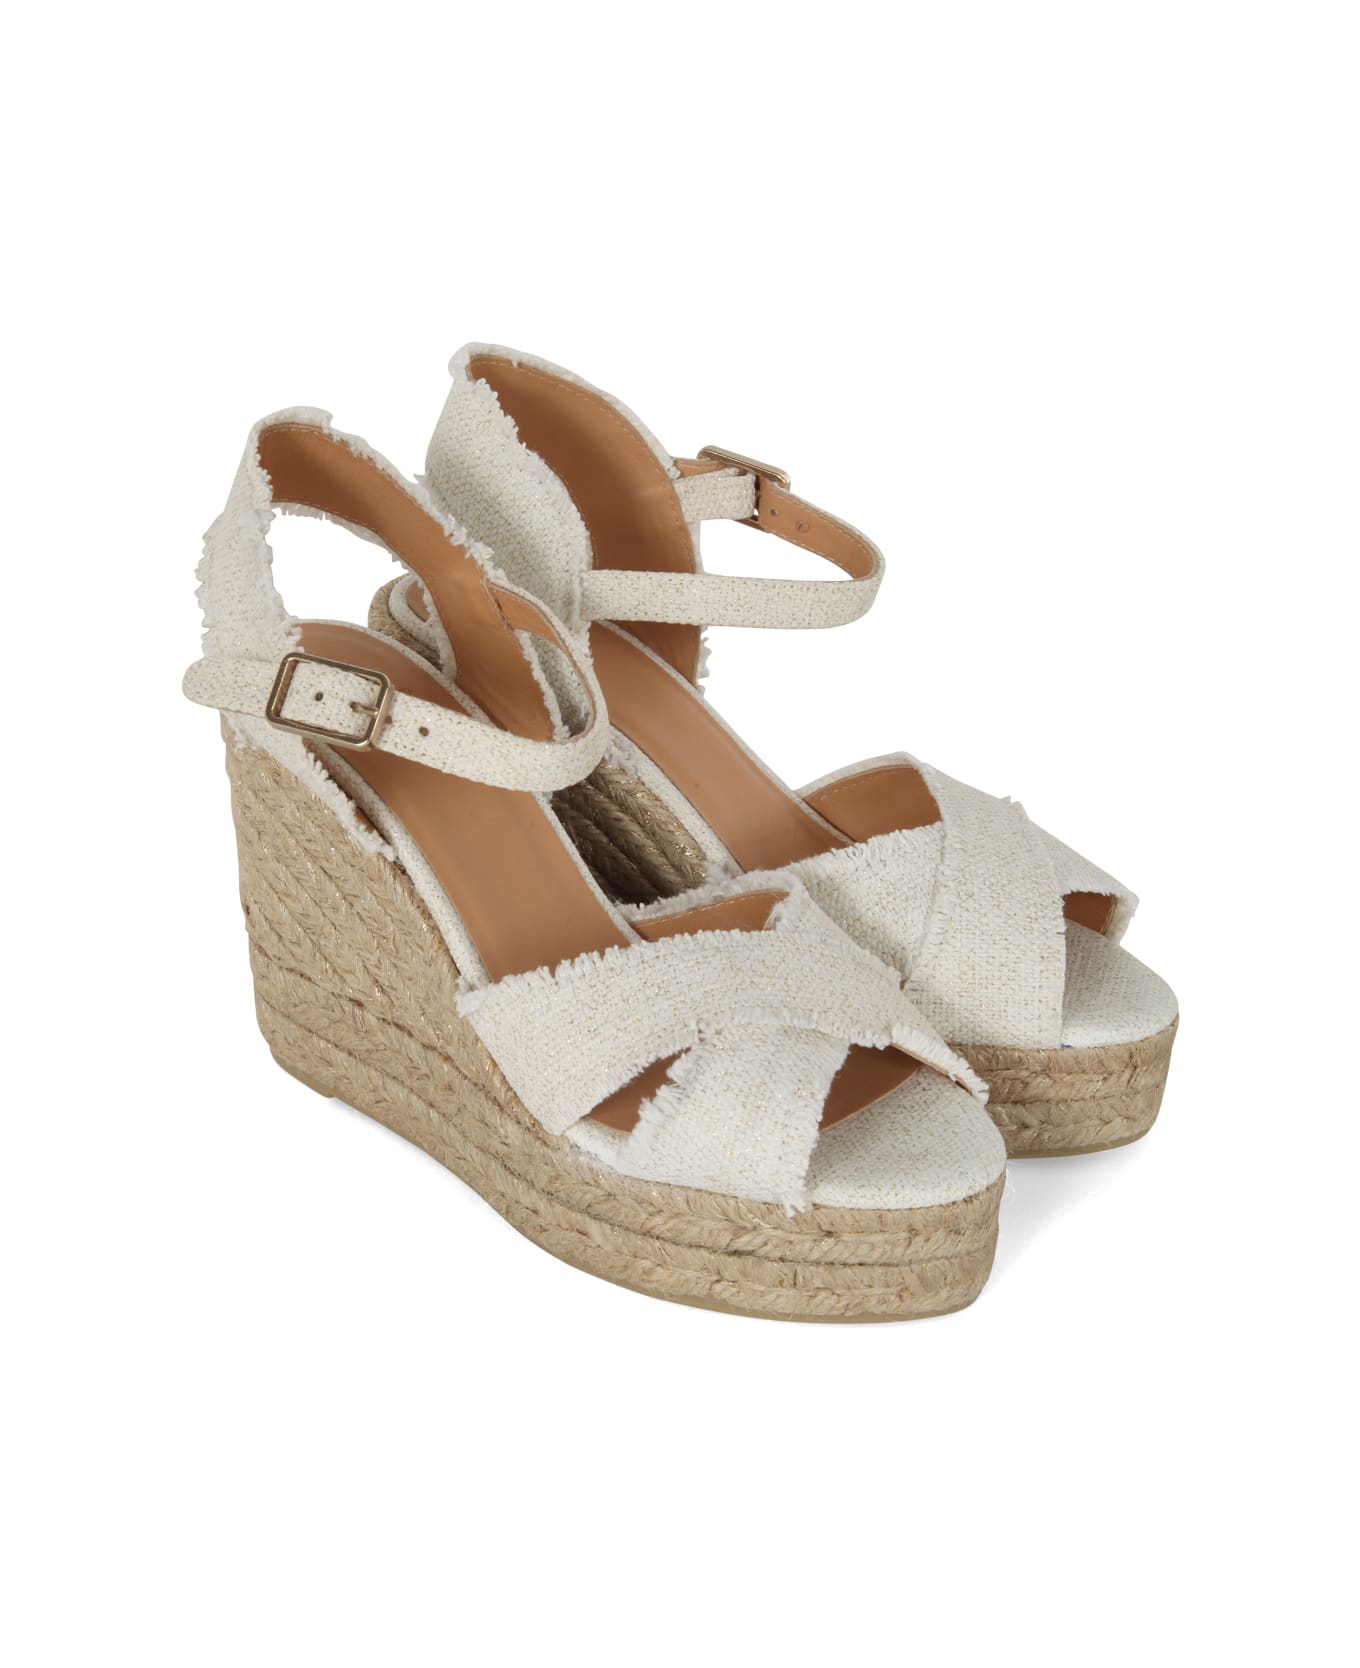 Castañer Bromelia Espadrilles With Belt On Ankles And Fringed Ankles - White Gold